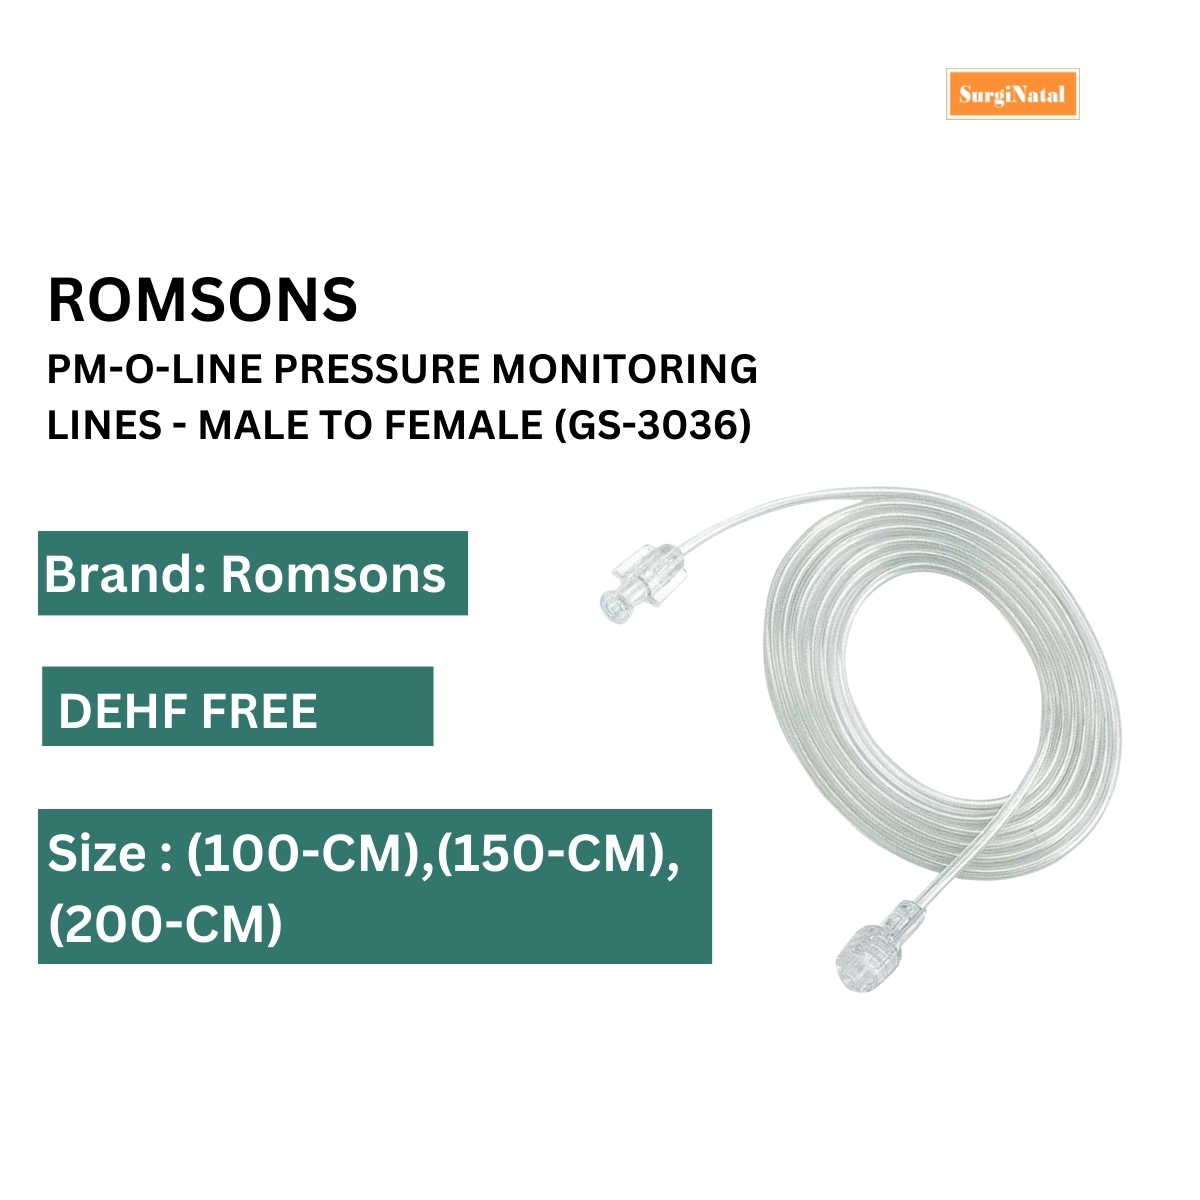 romsons pm-o-line pressure monitoring lines - male to female (gs-3036)